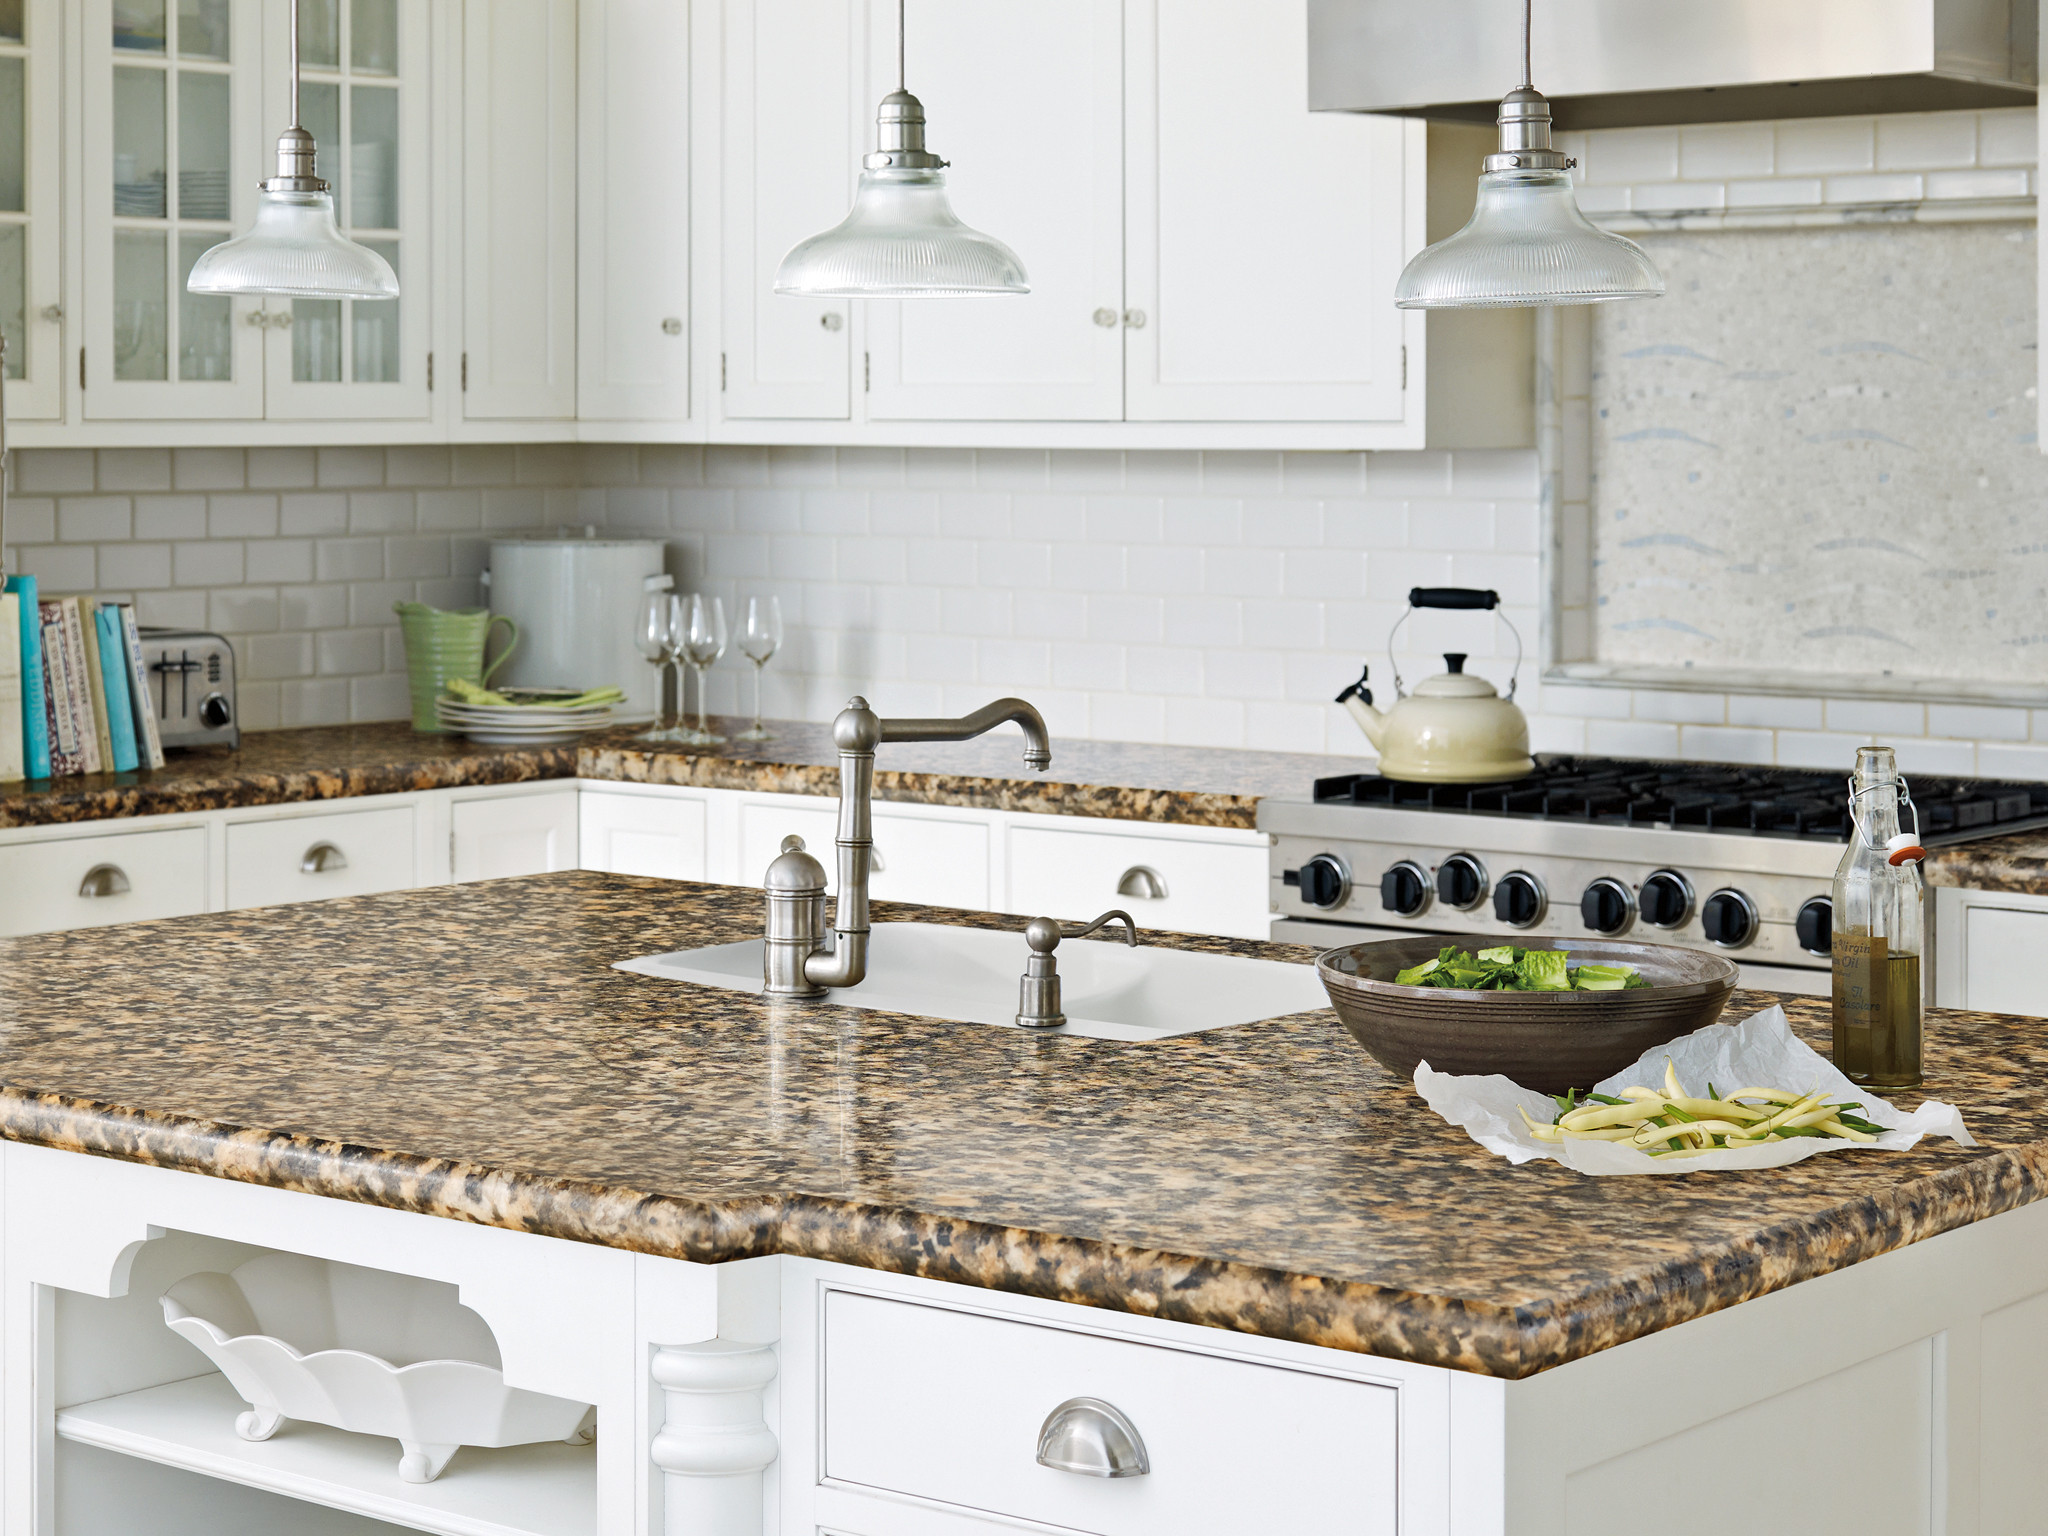 Kitchen Counter Top Ideas
 50 Best Kitchen Countertops Options You Should See